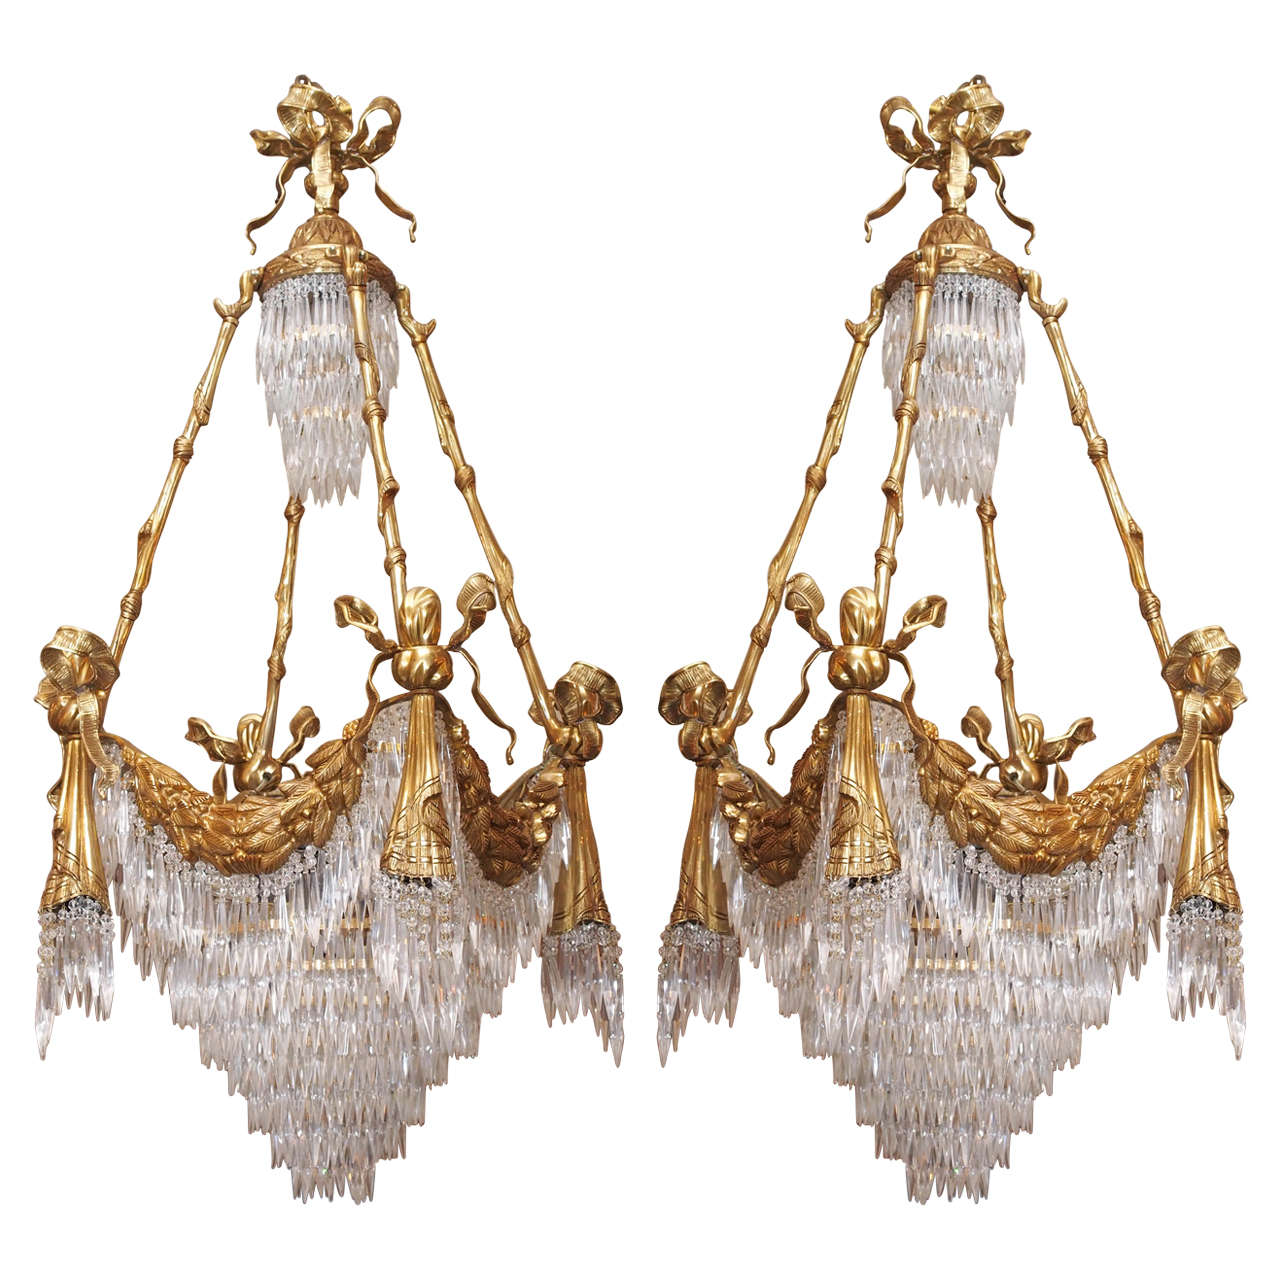 Pair of Fabulous Empress Eugenie Crystal and Ormolu Chandeliers